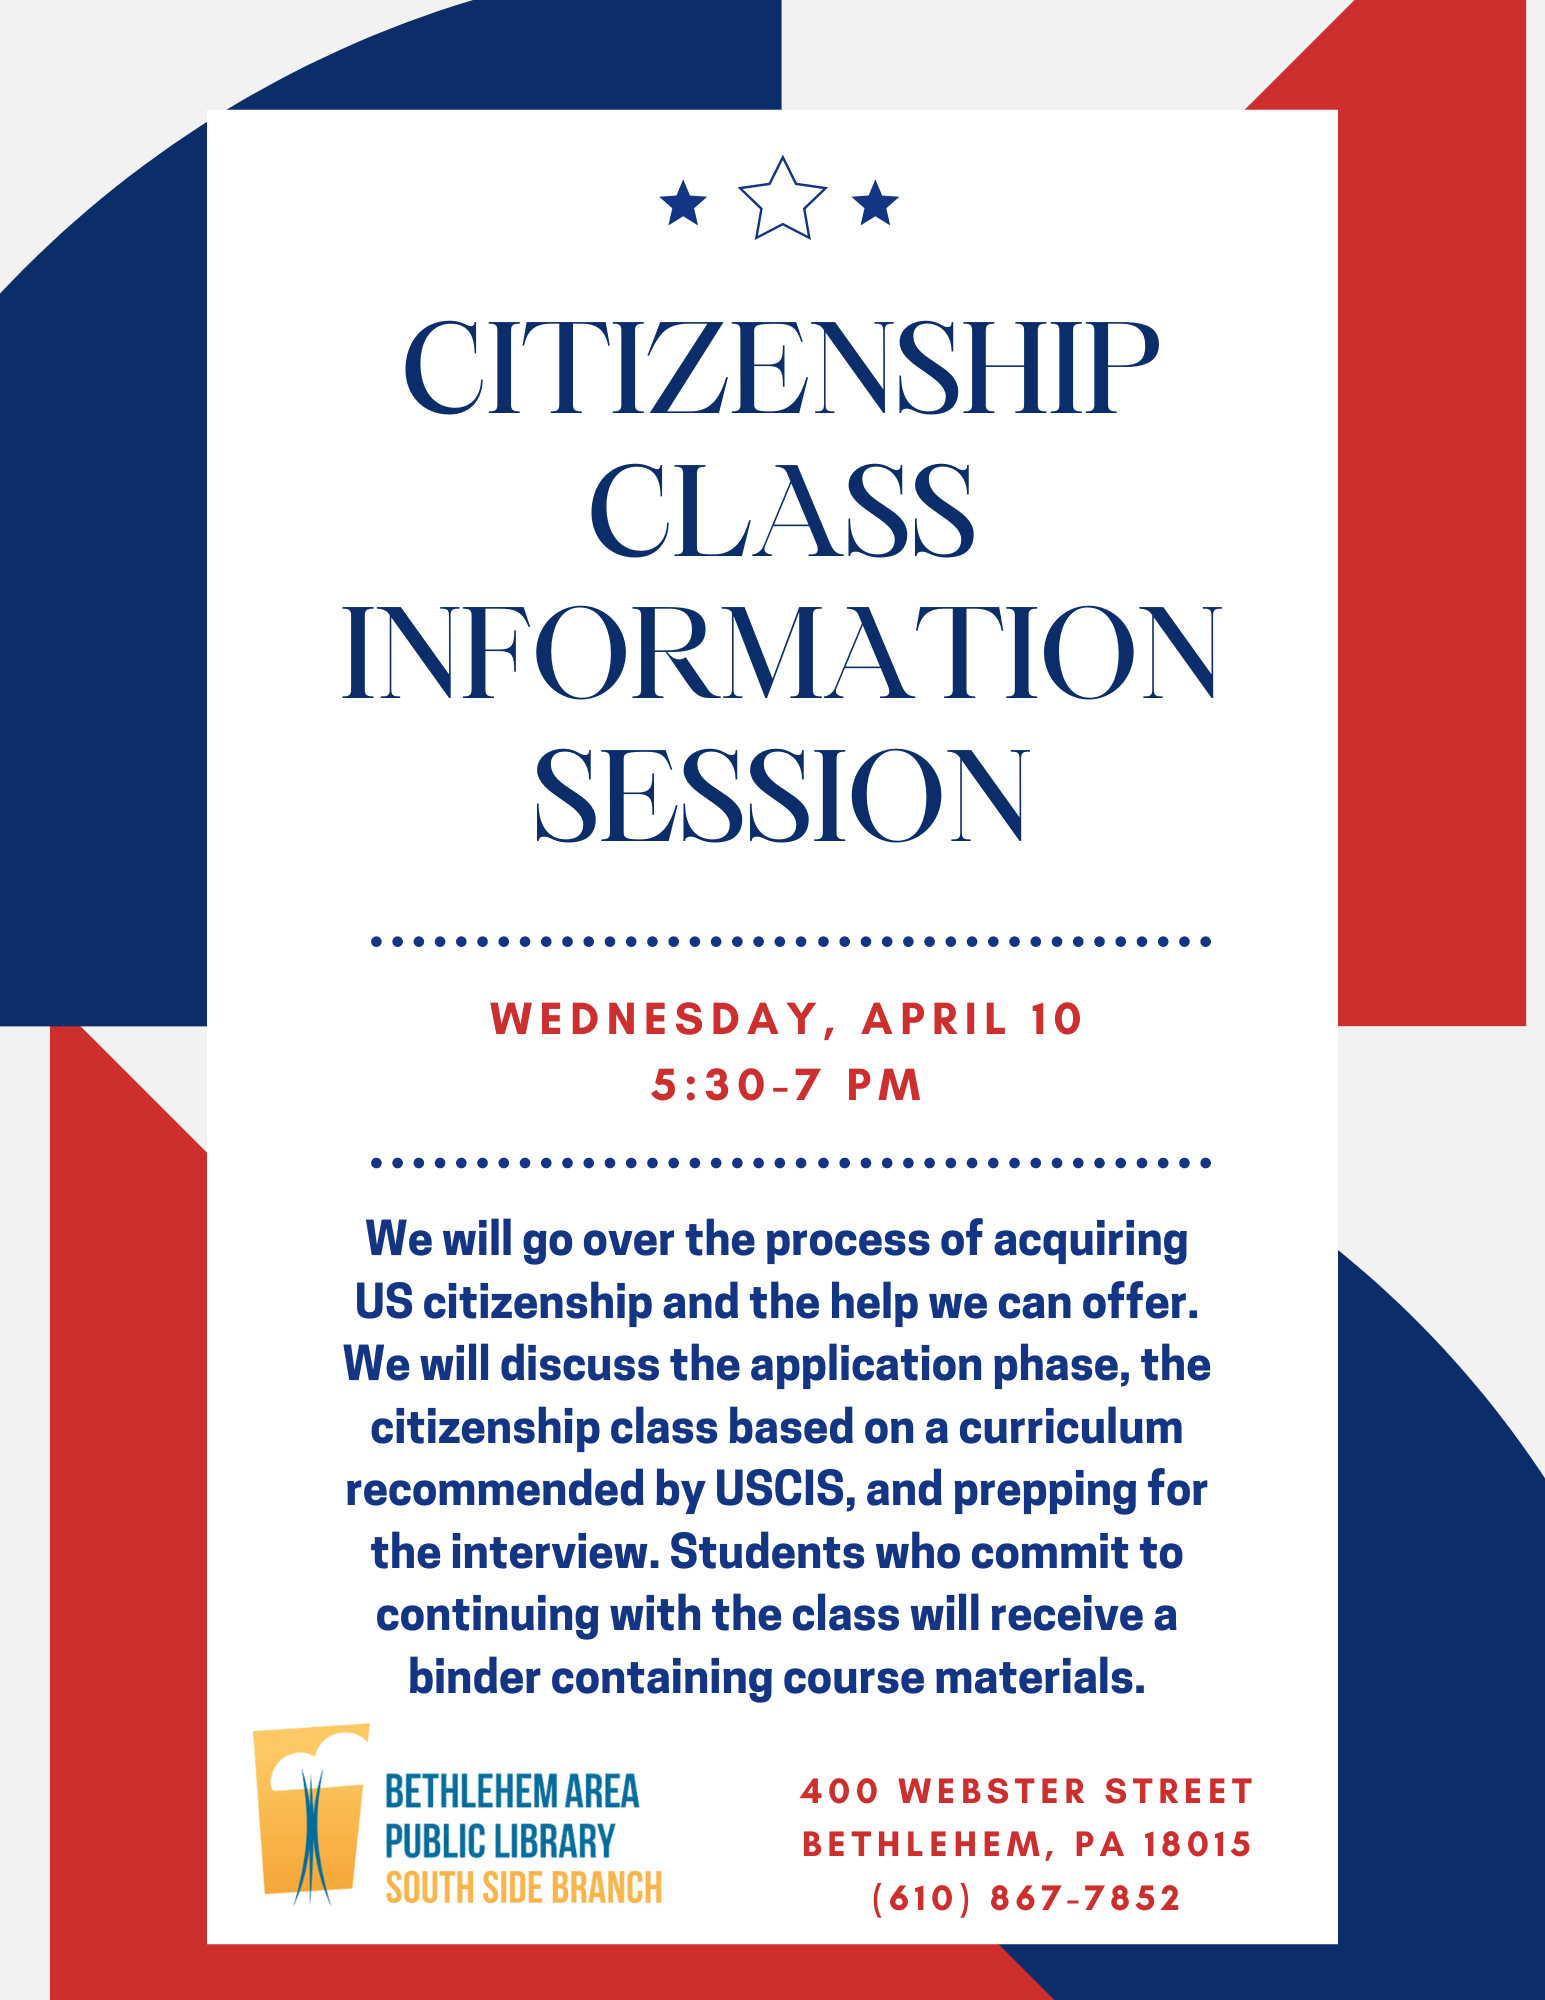 Red, white, and blue background, says Citizenship Class Information Session